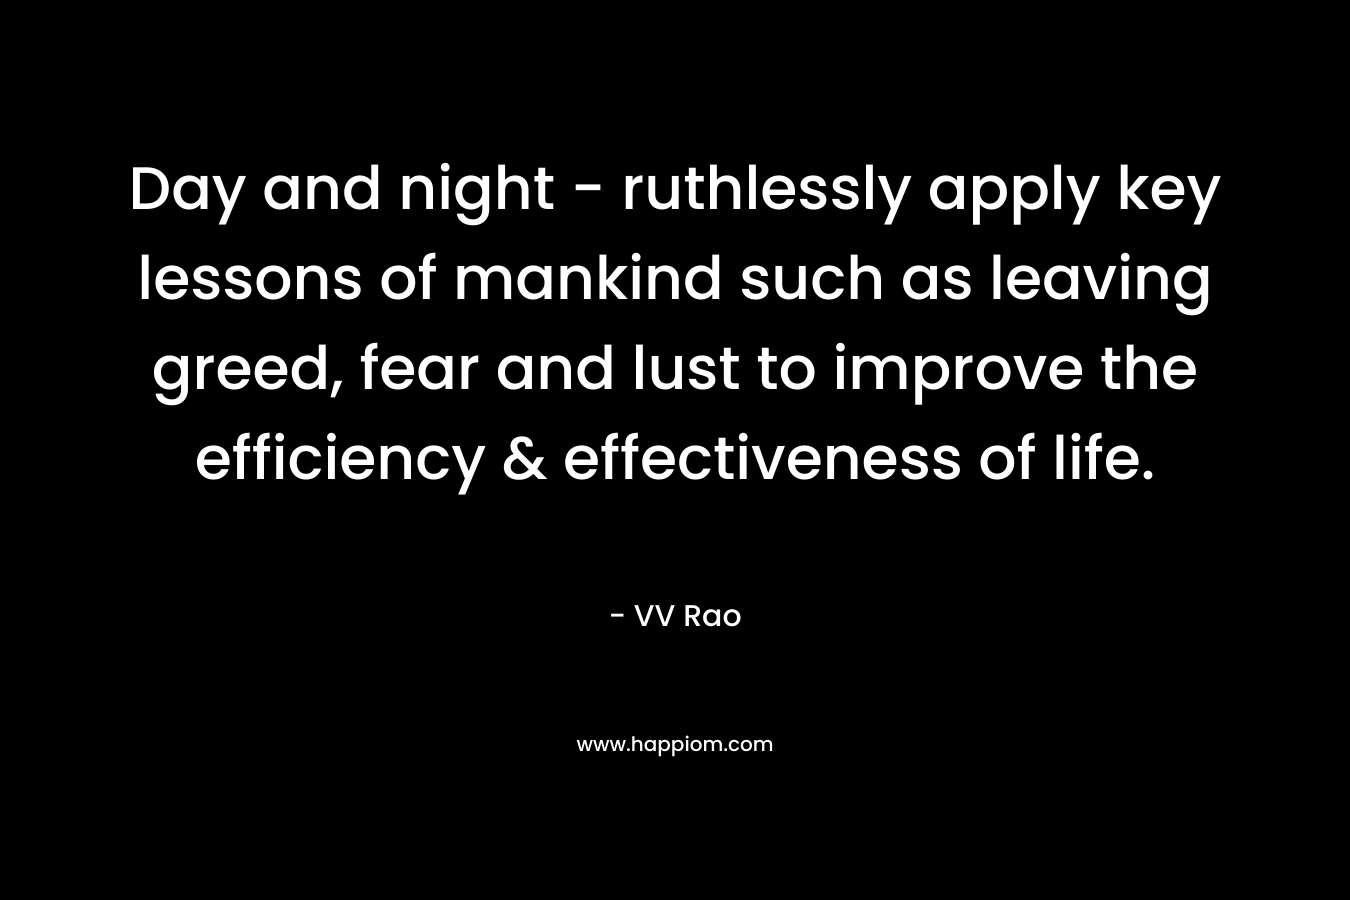 Day and night – ruthlessly apply key lessons of mankind such as leaving greed, fear and lust to improve the efficiency & effectiveness of life. – VV Rao